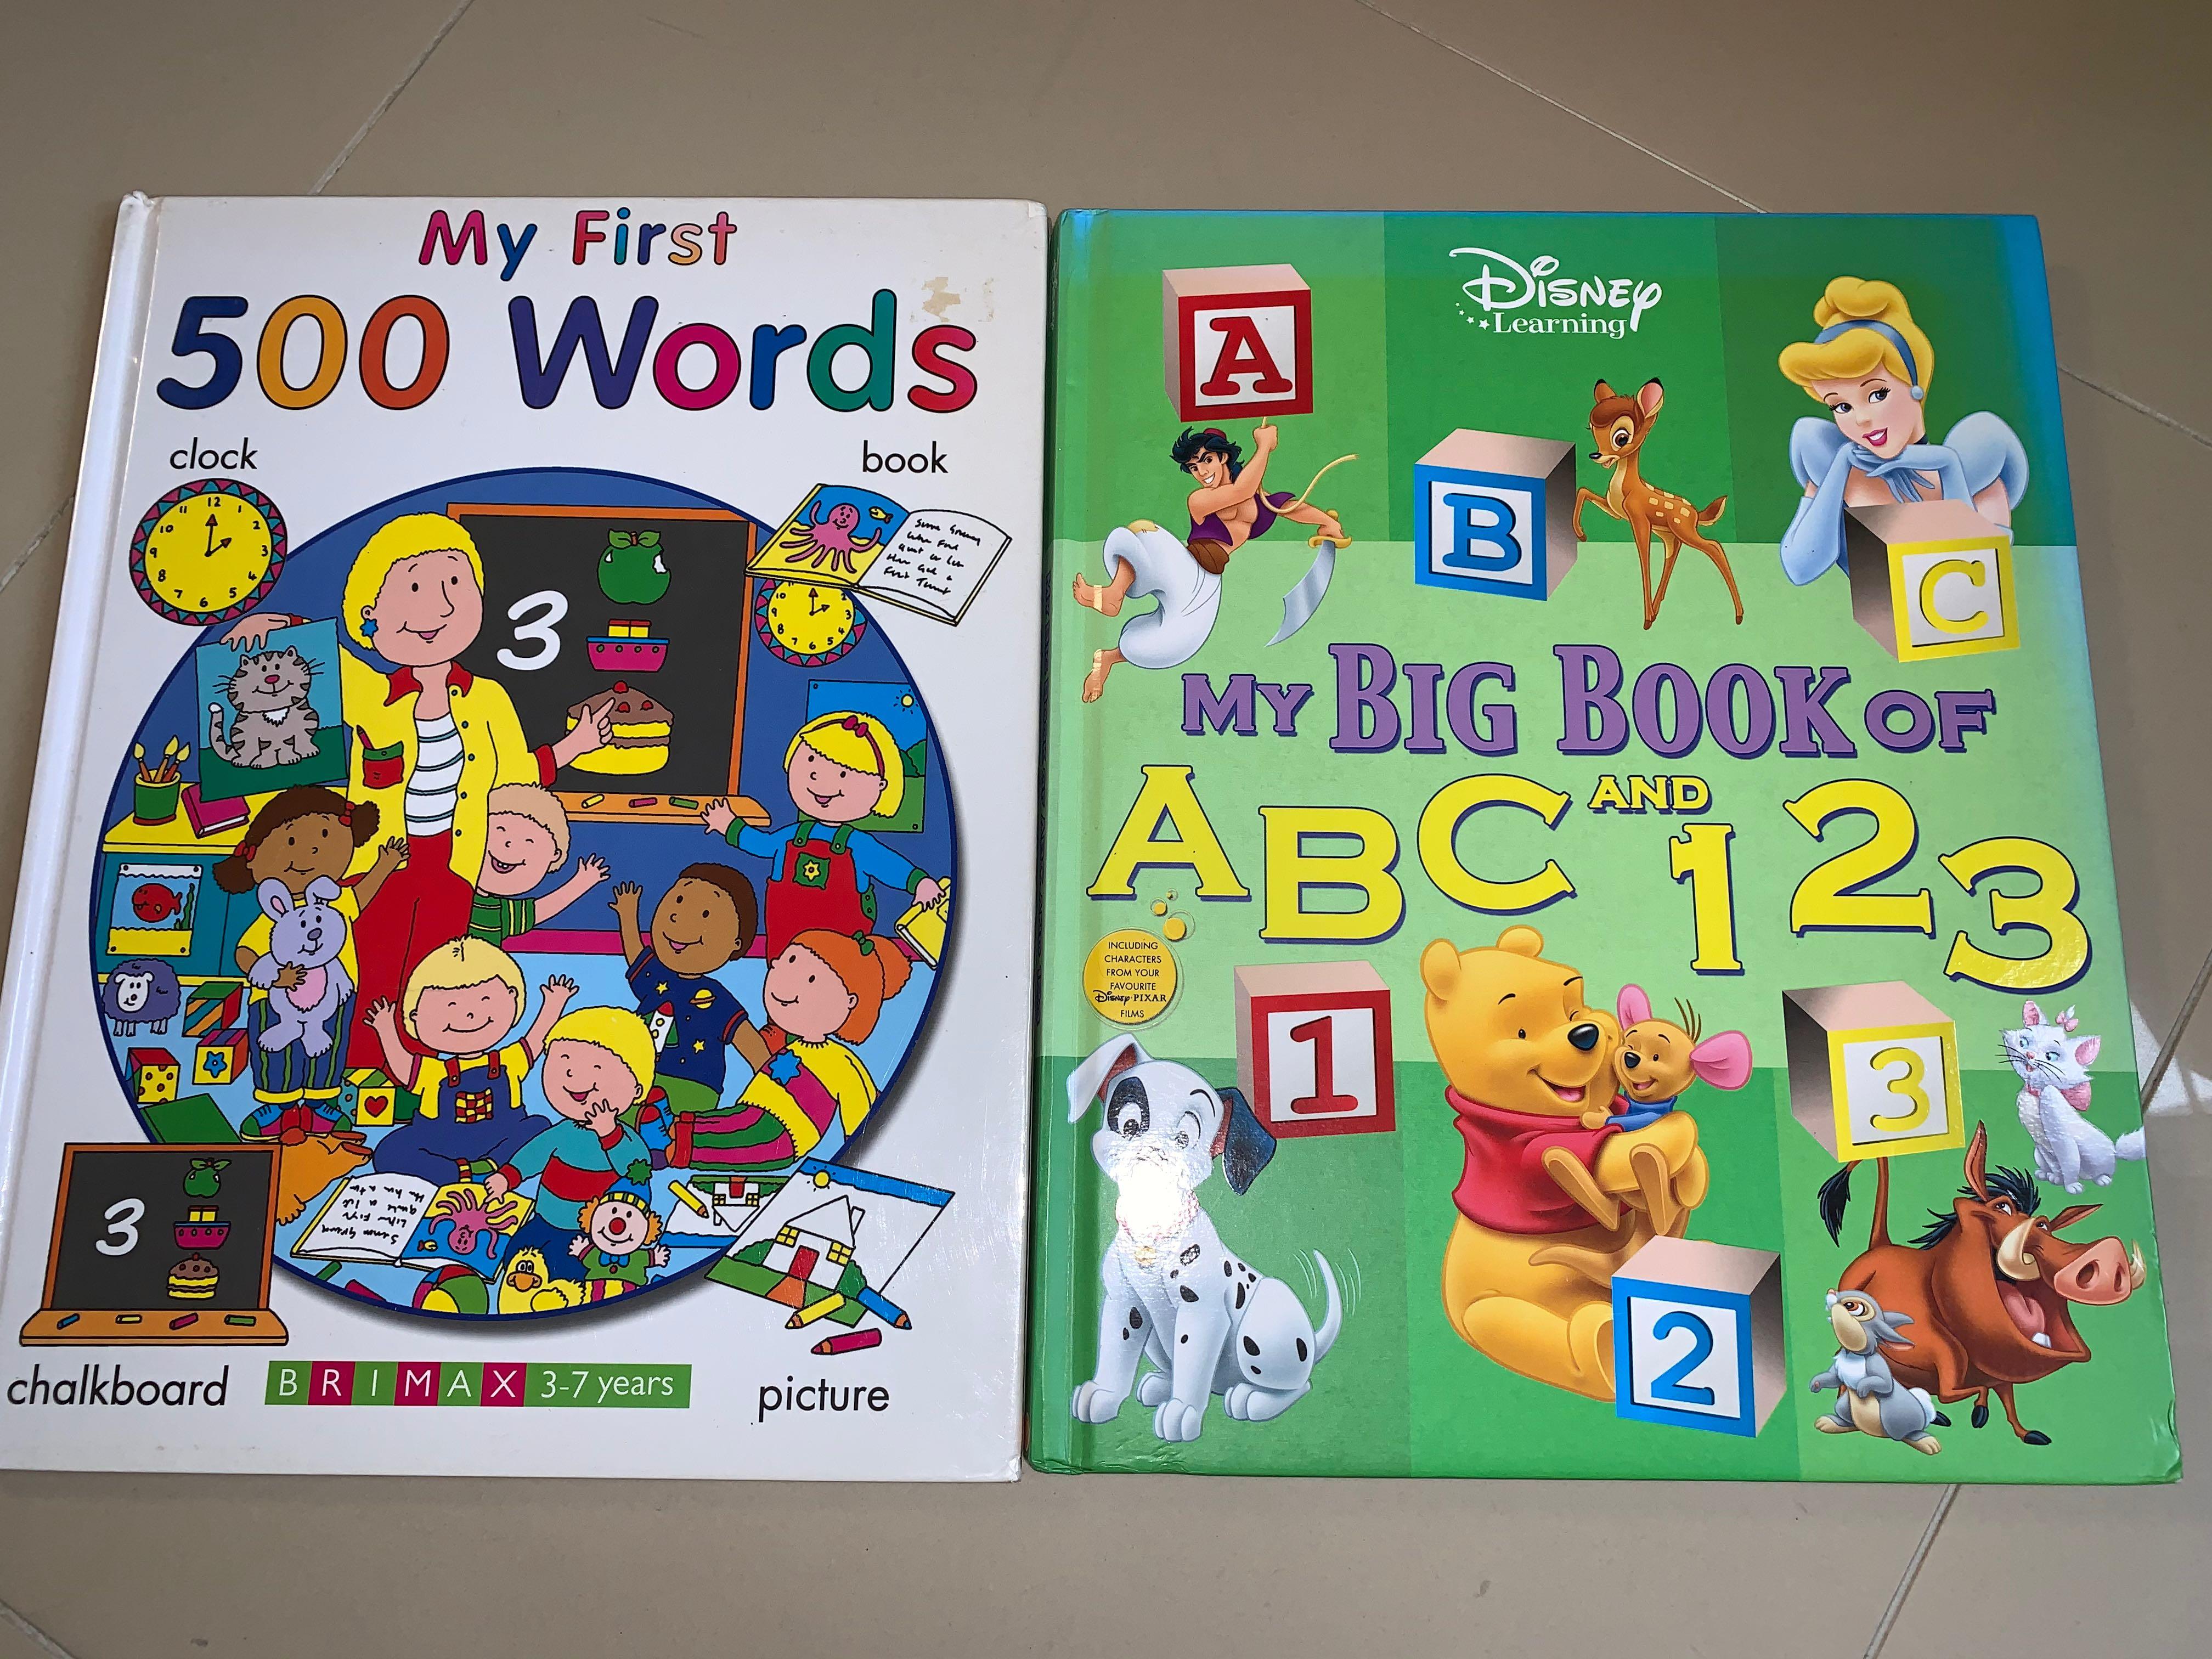 My big book of ABC and 123 & My first 500 words, 興趣及遊戲, 書本